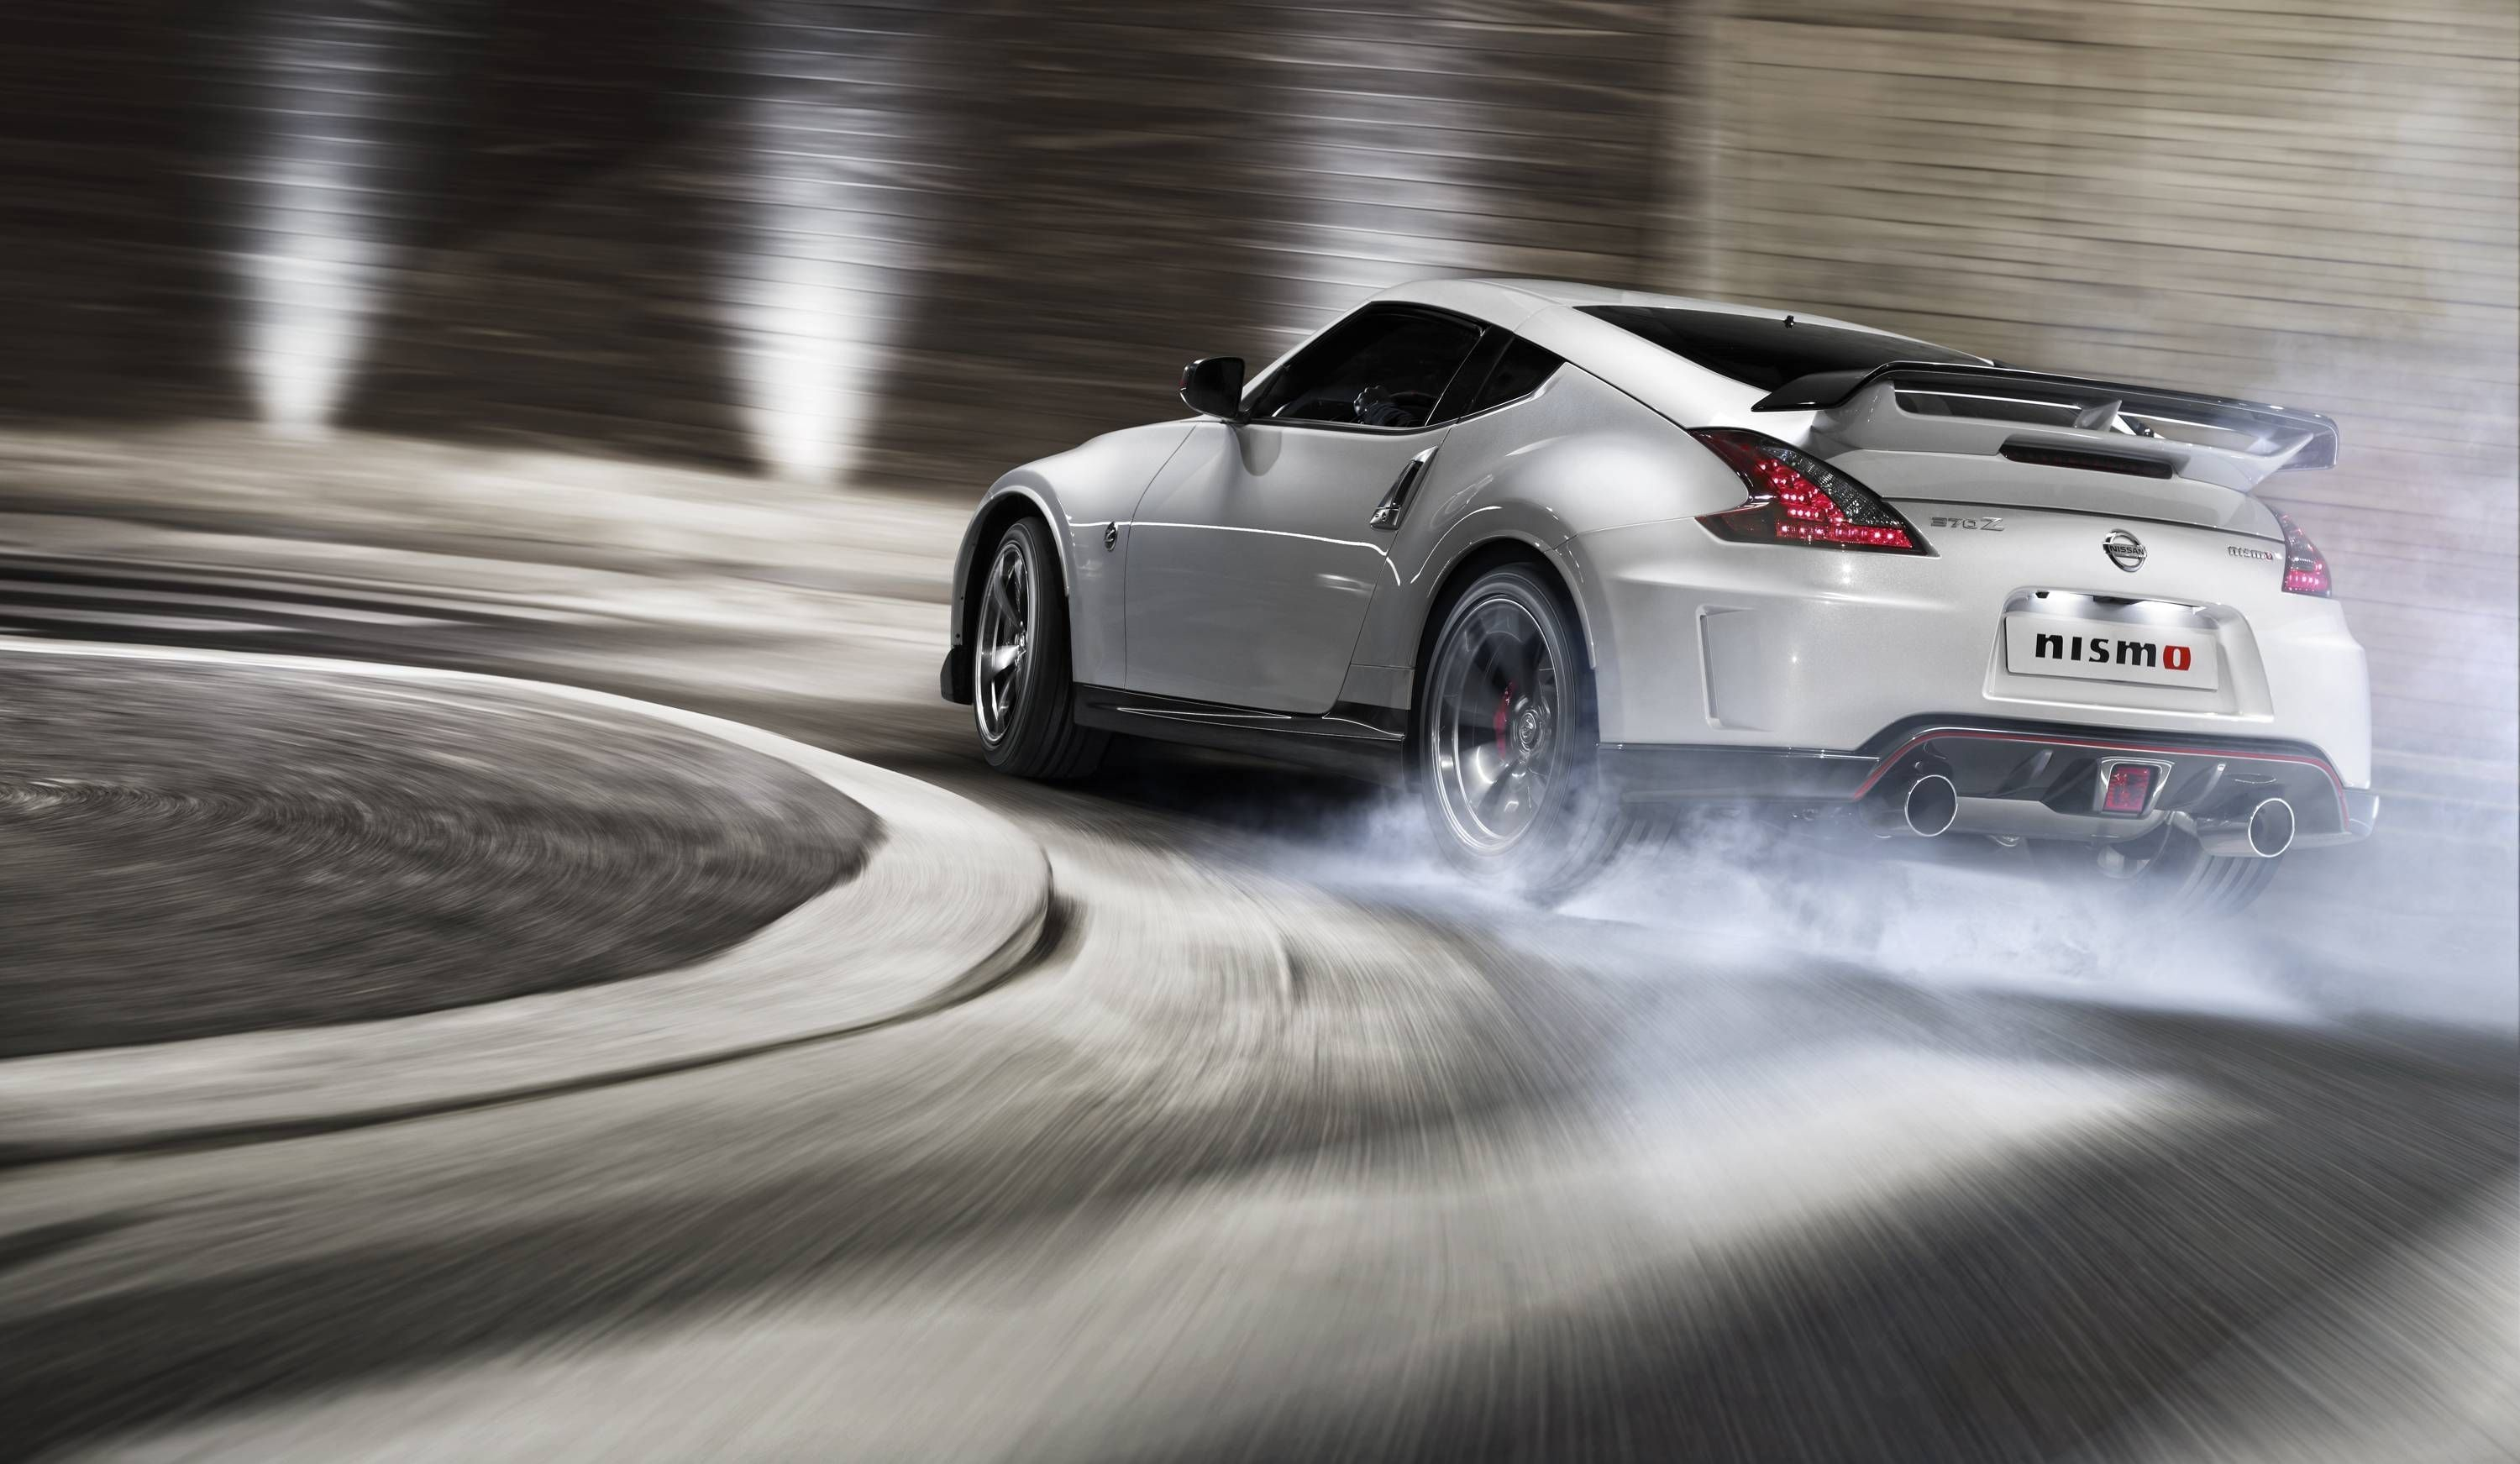 3000x1743 Nismo Wallpapers Top Free Nismo Backgrounds